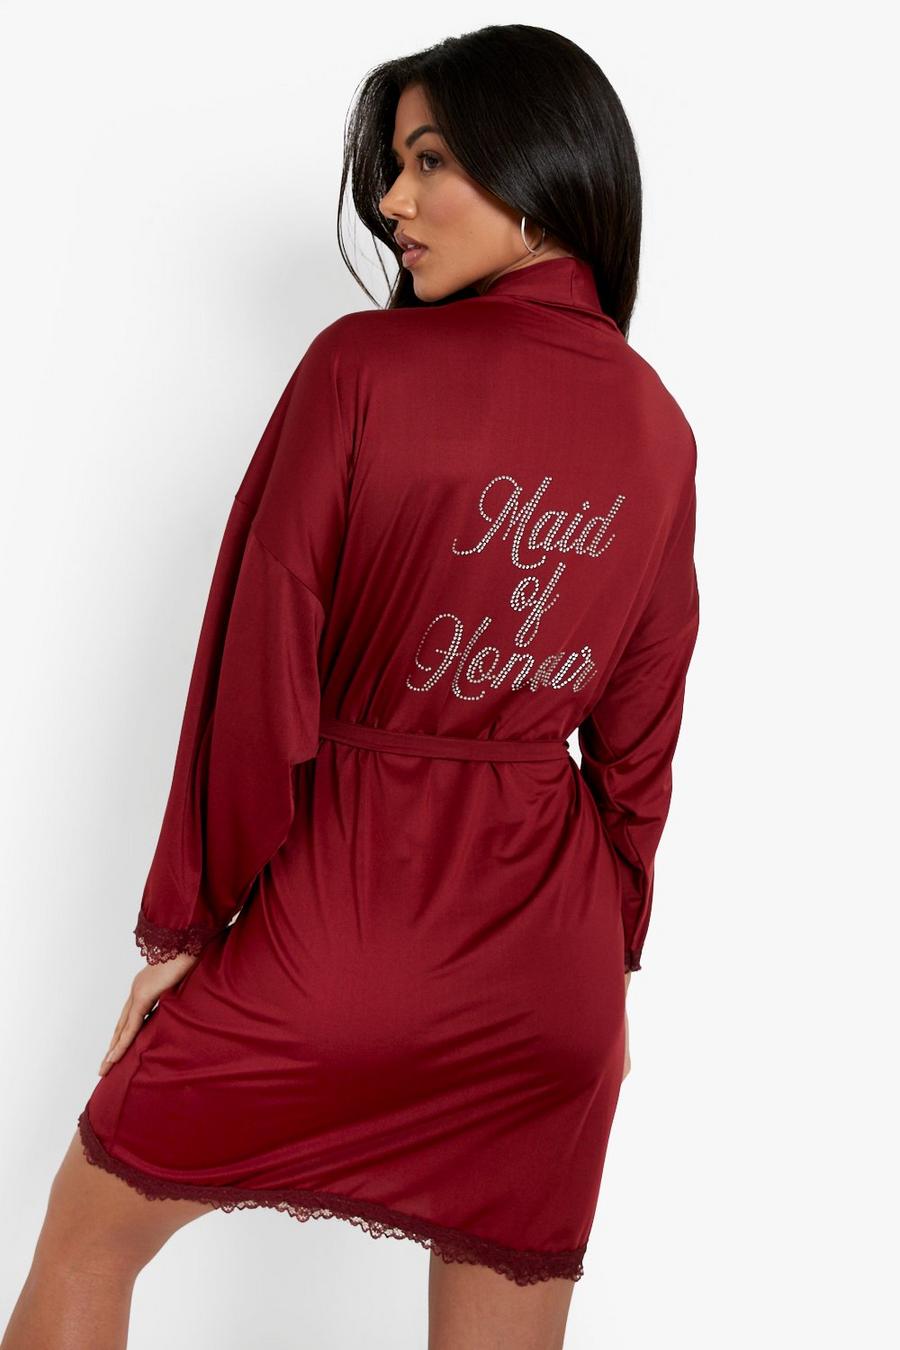 Maid Of Honour Morgenmantel mit Strass, Wine red